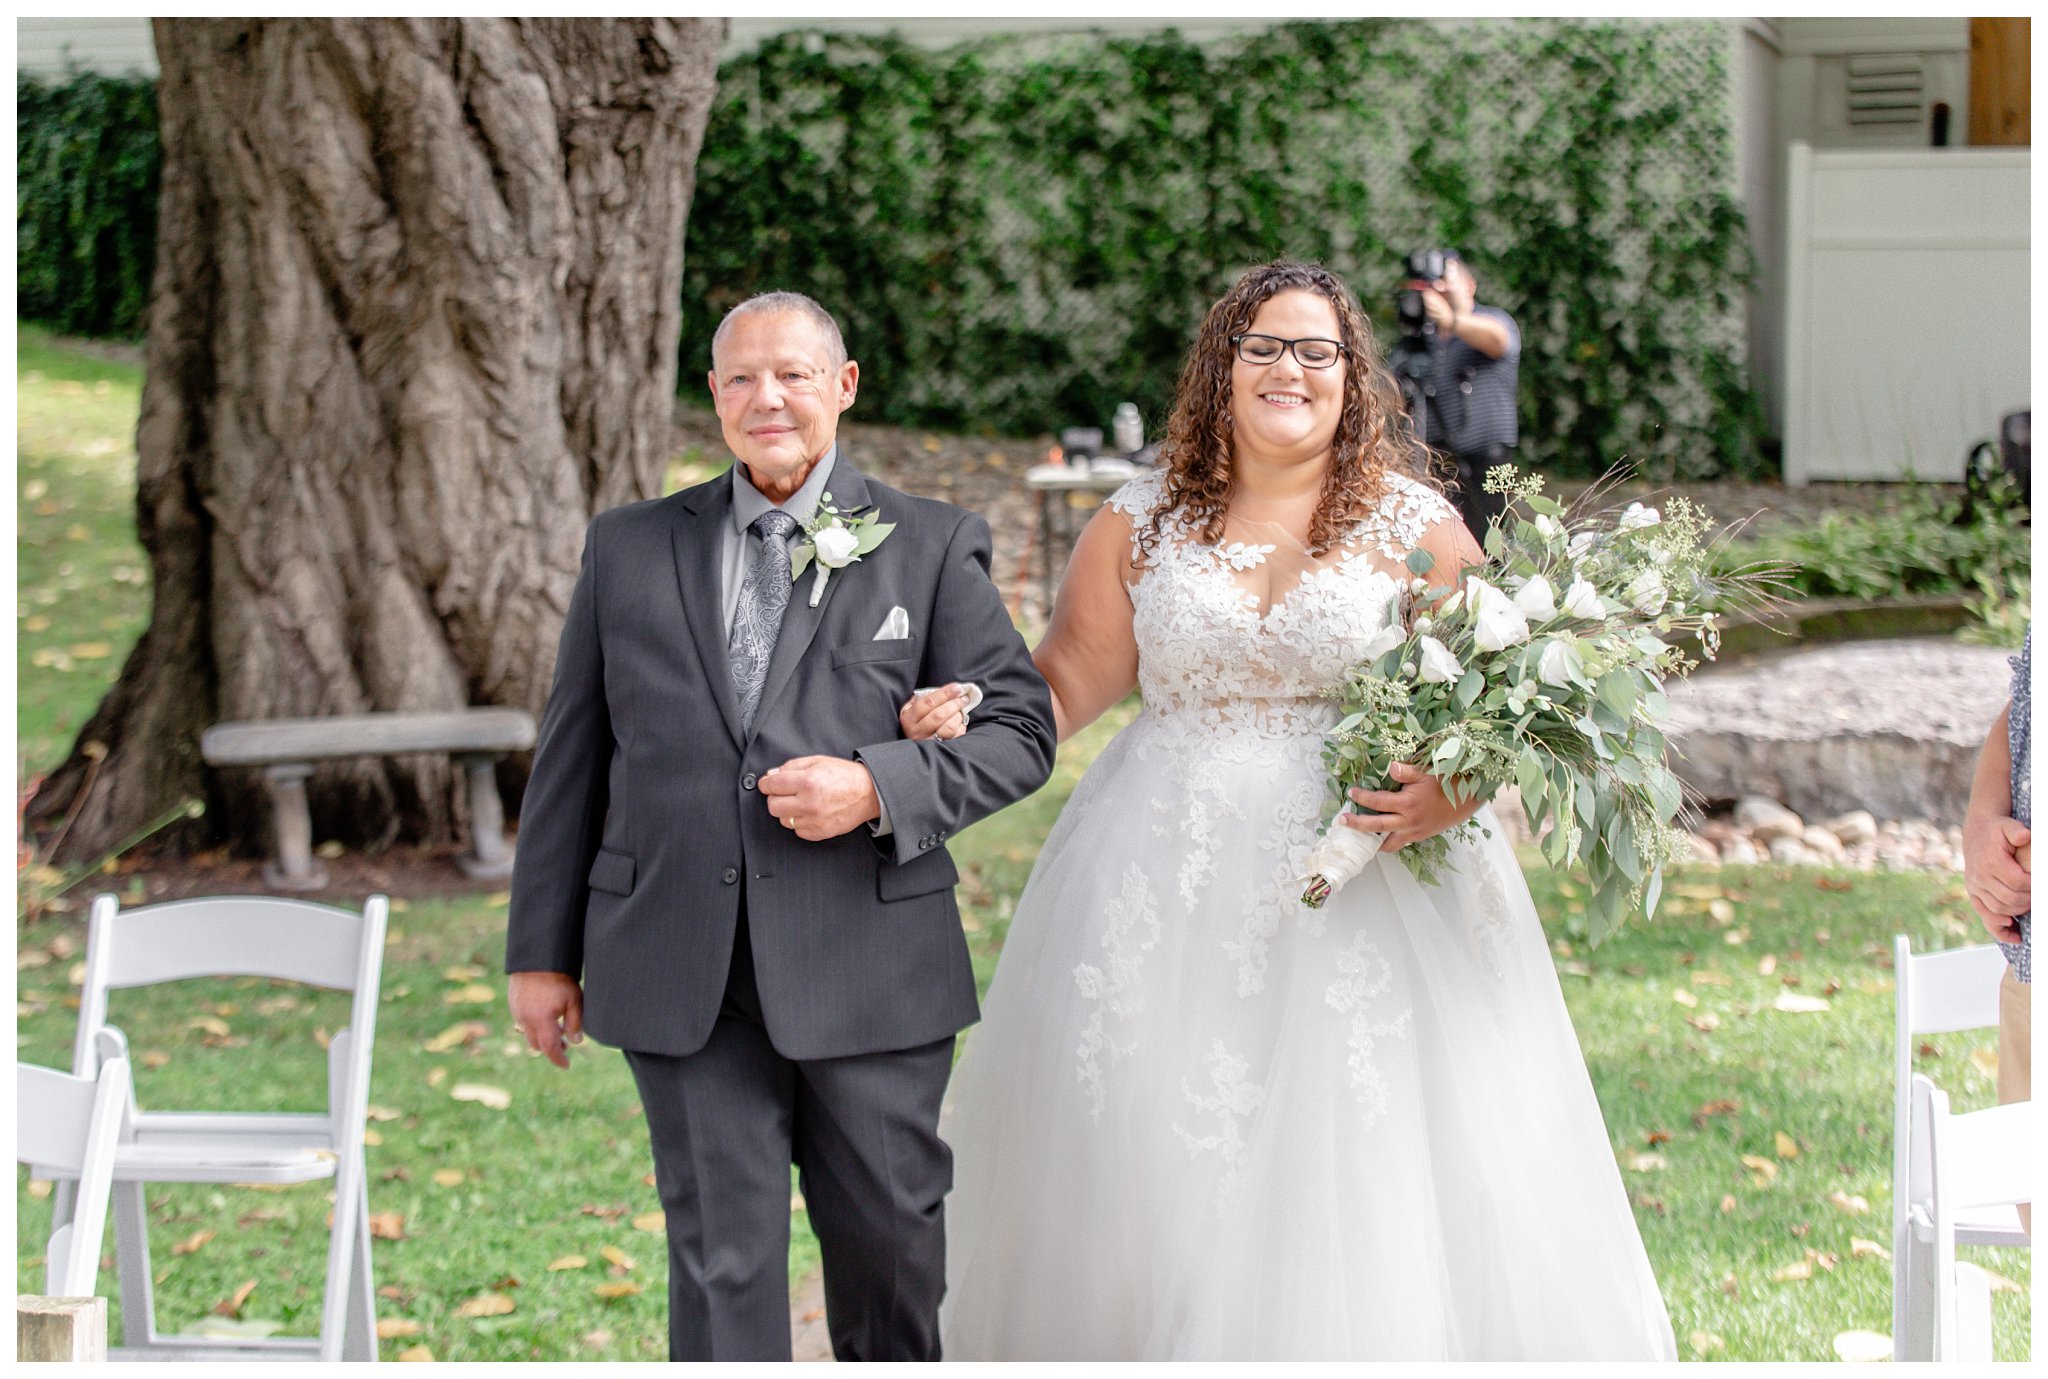 Dibble's Inn Apply Orchard Wedding. Emily and Don. Summer 2020. Joanna Young Photography_0020.jpg